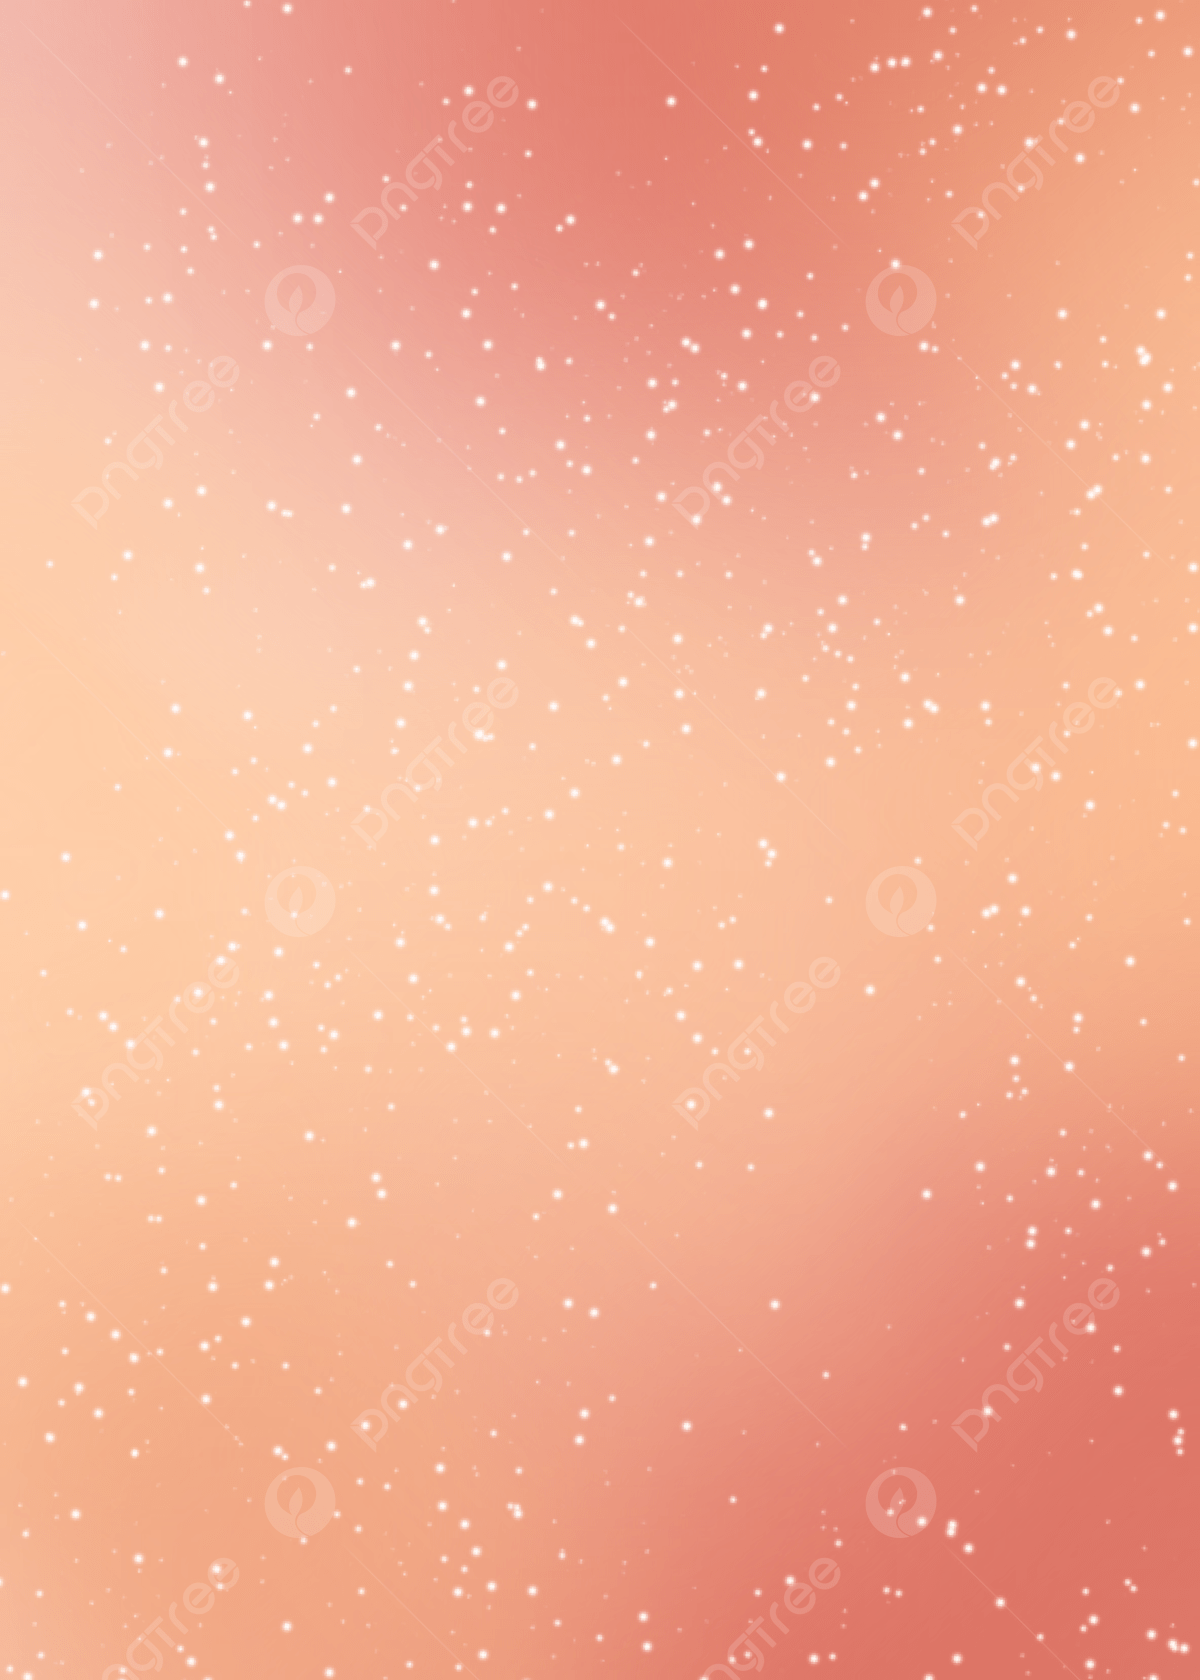 Abstract Gradient Blur Pink Background Wallpaper Image For Free Download